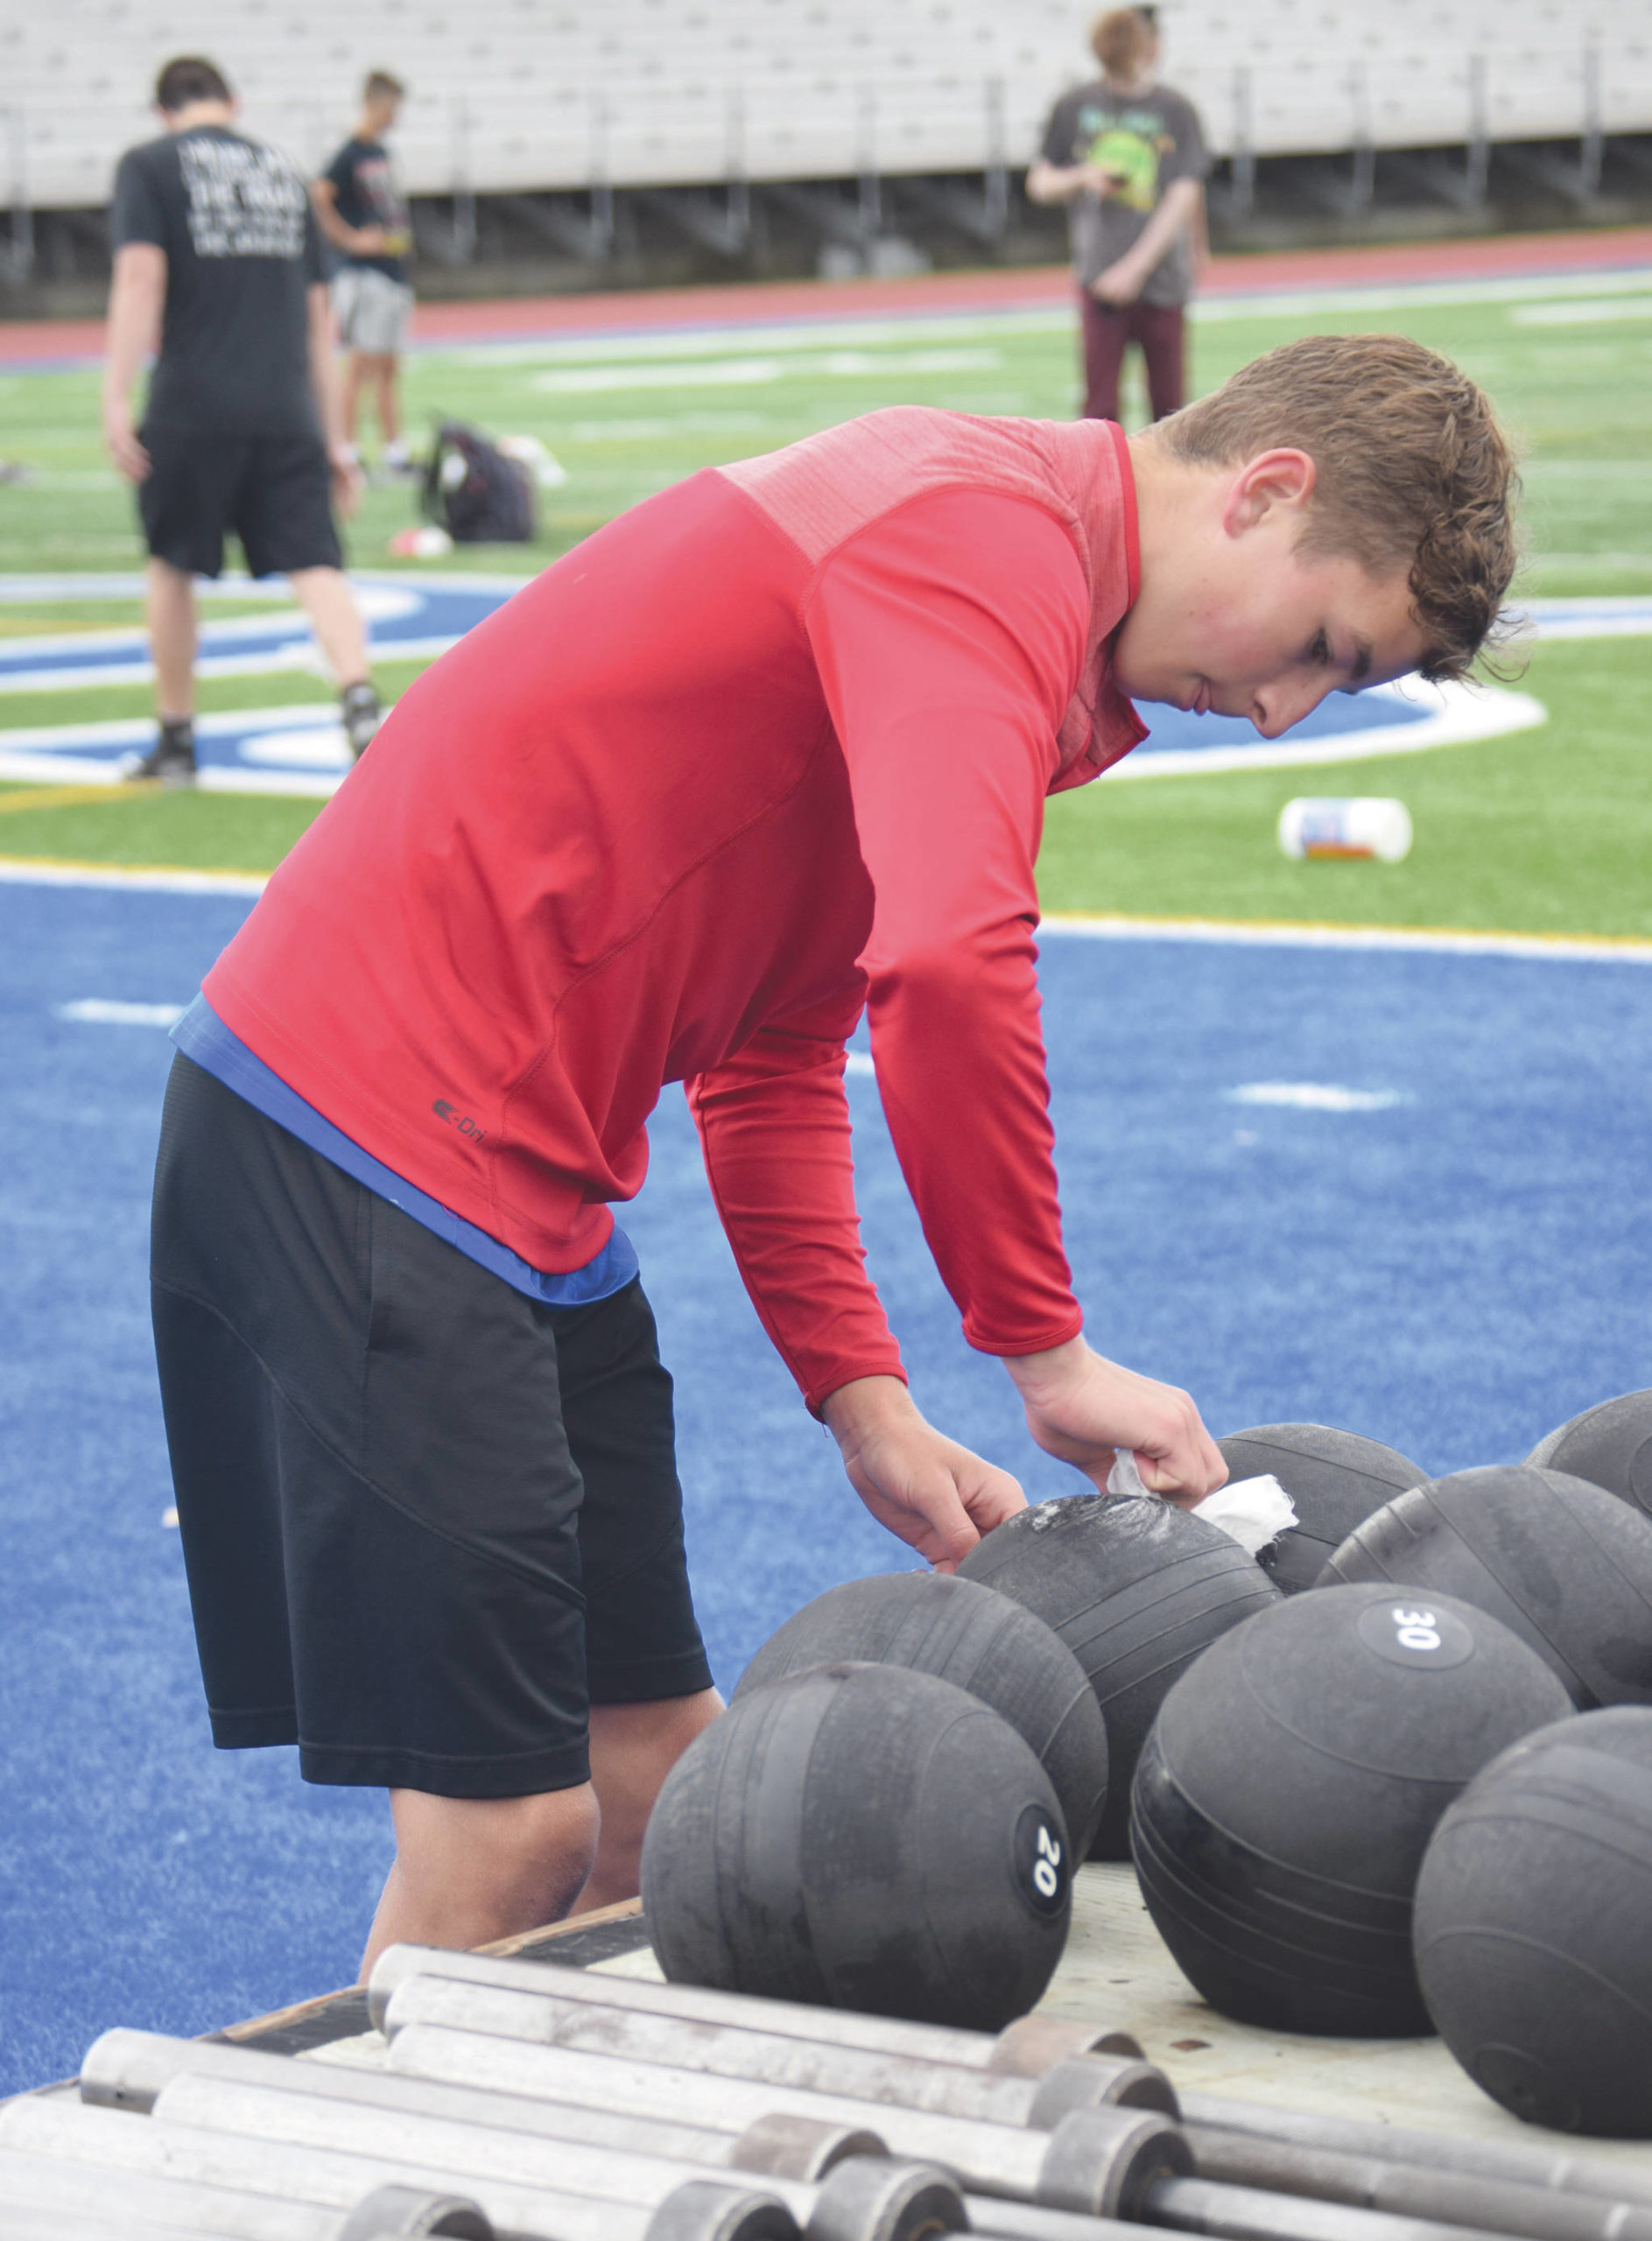 Soldotna football player Zac Buckbee disinfects a smash ball Wednesday, June 17, 2020, at Justin Maile Field in Soldotna, Alaska. (Photo by Jeff Helminiak/Peninsula Clarion)